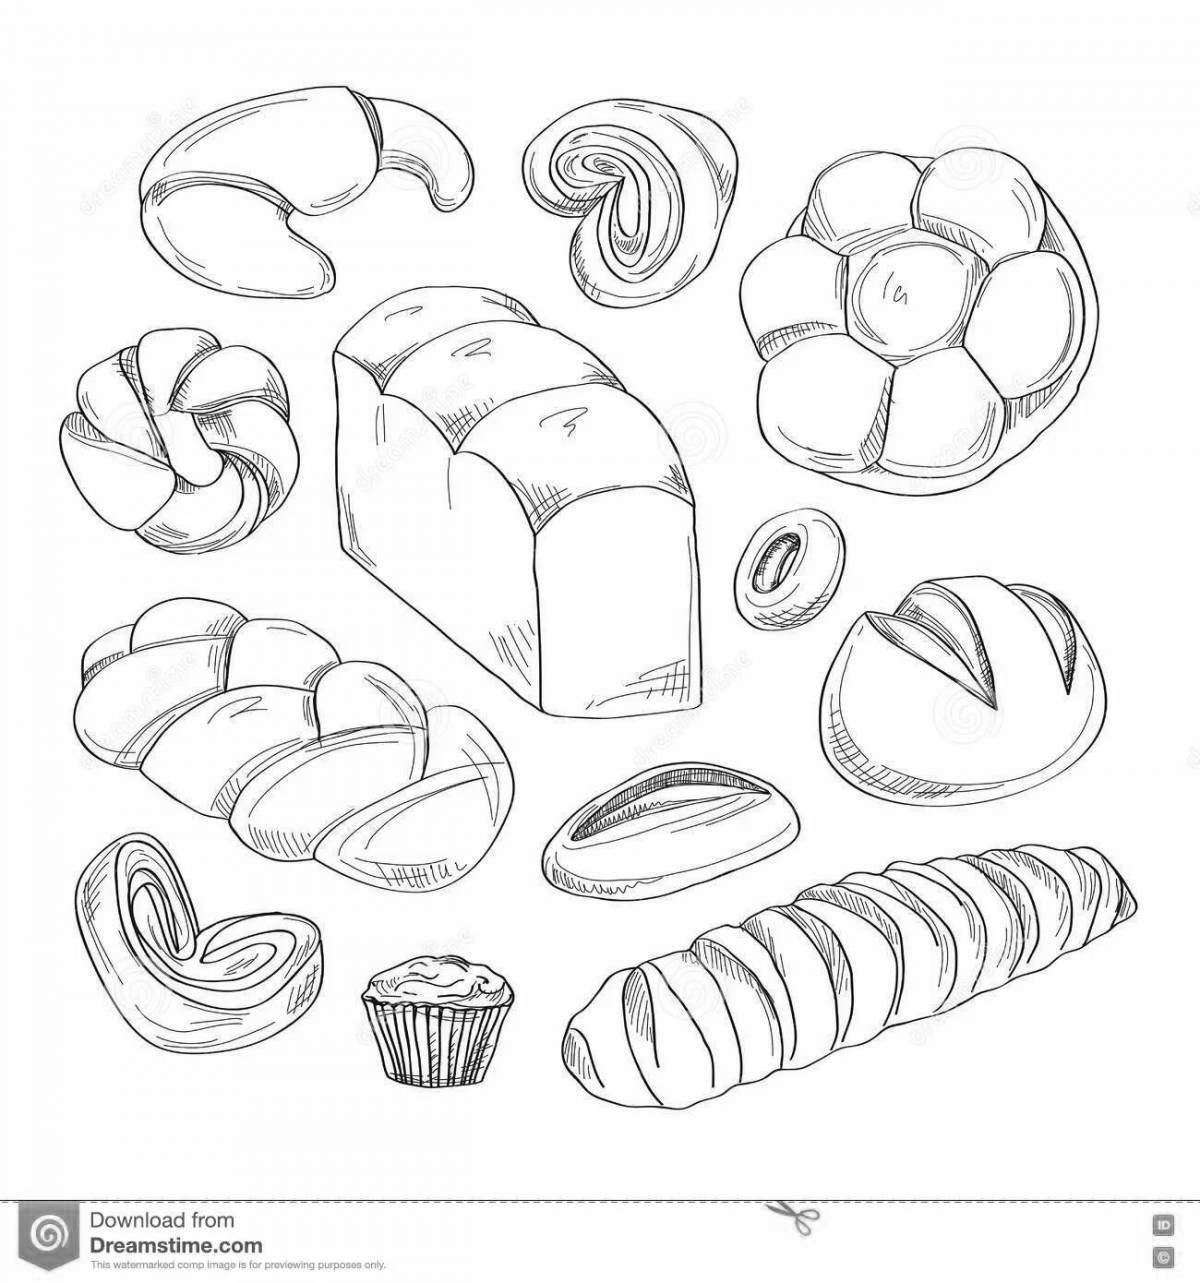 Fun pastry coloring for students